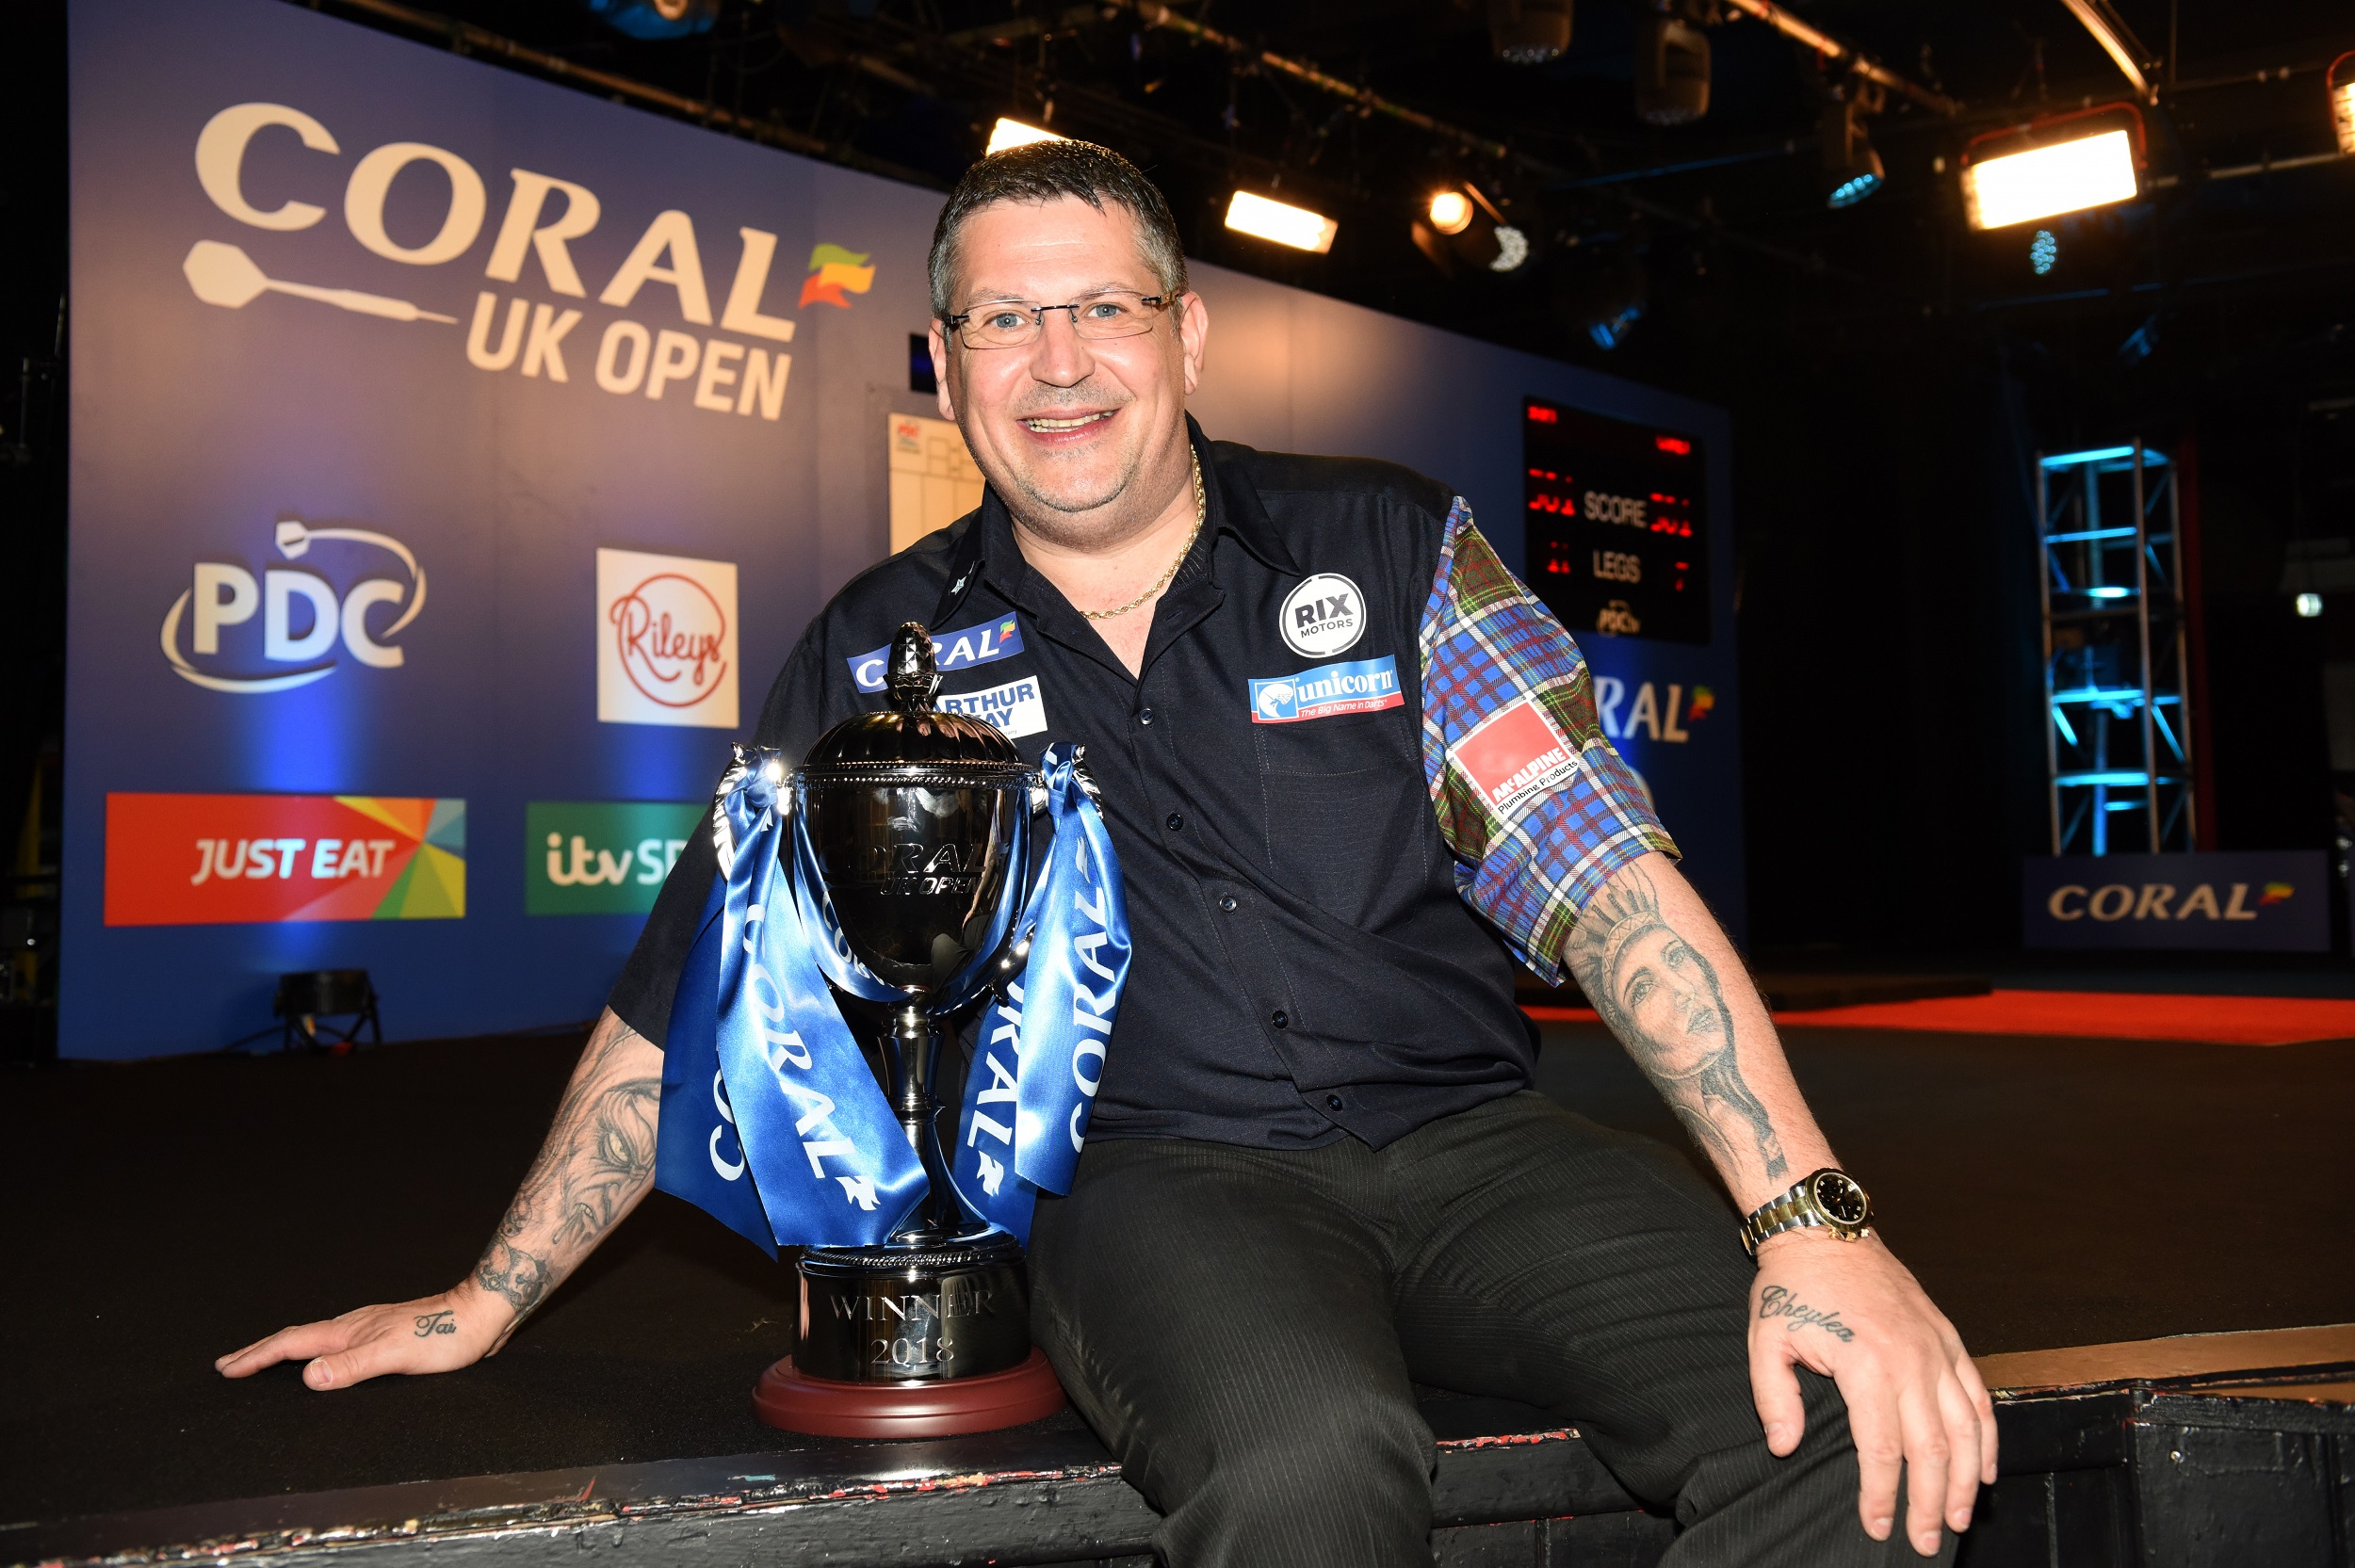 Anderson will defend UK Open crown!